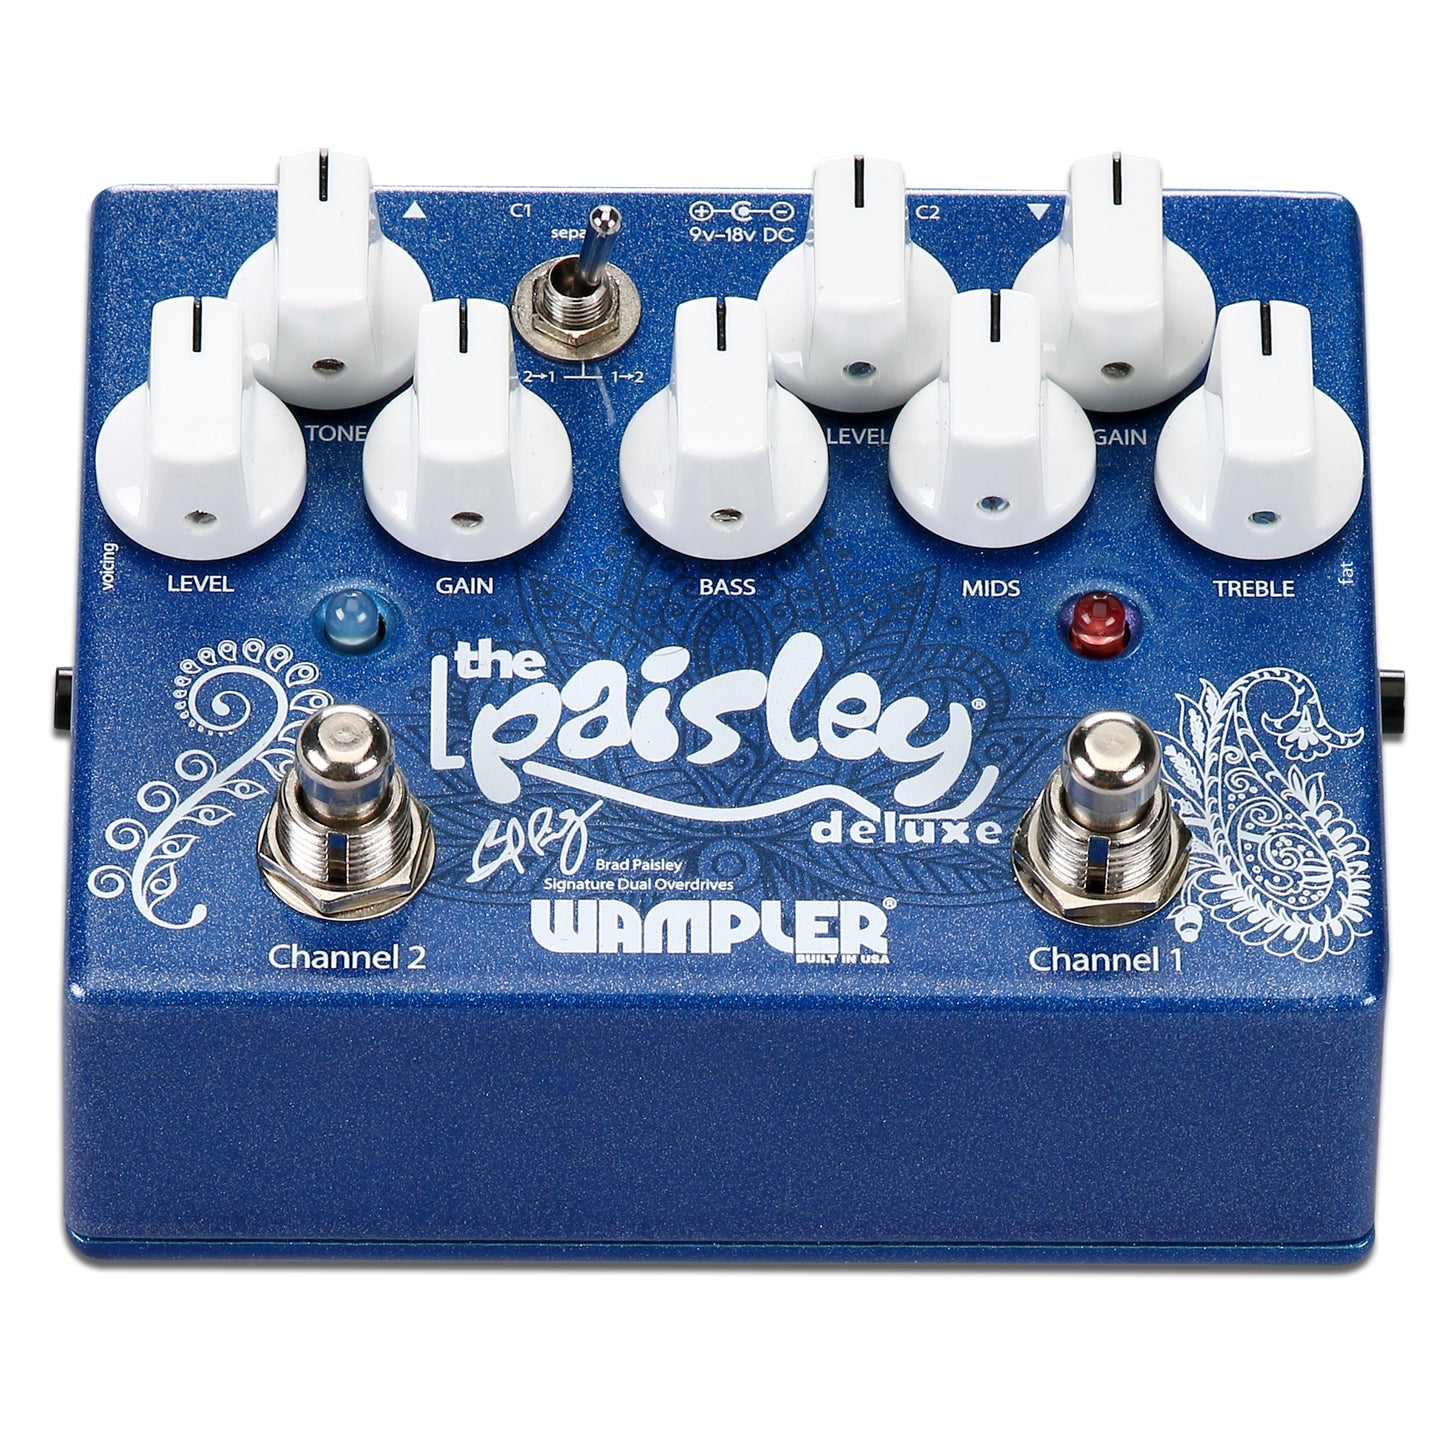 Wampler Pedals Paisley Drive Deluxe Overdrive